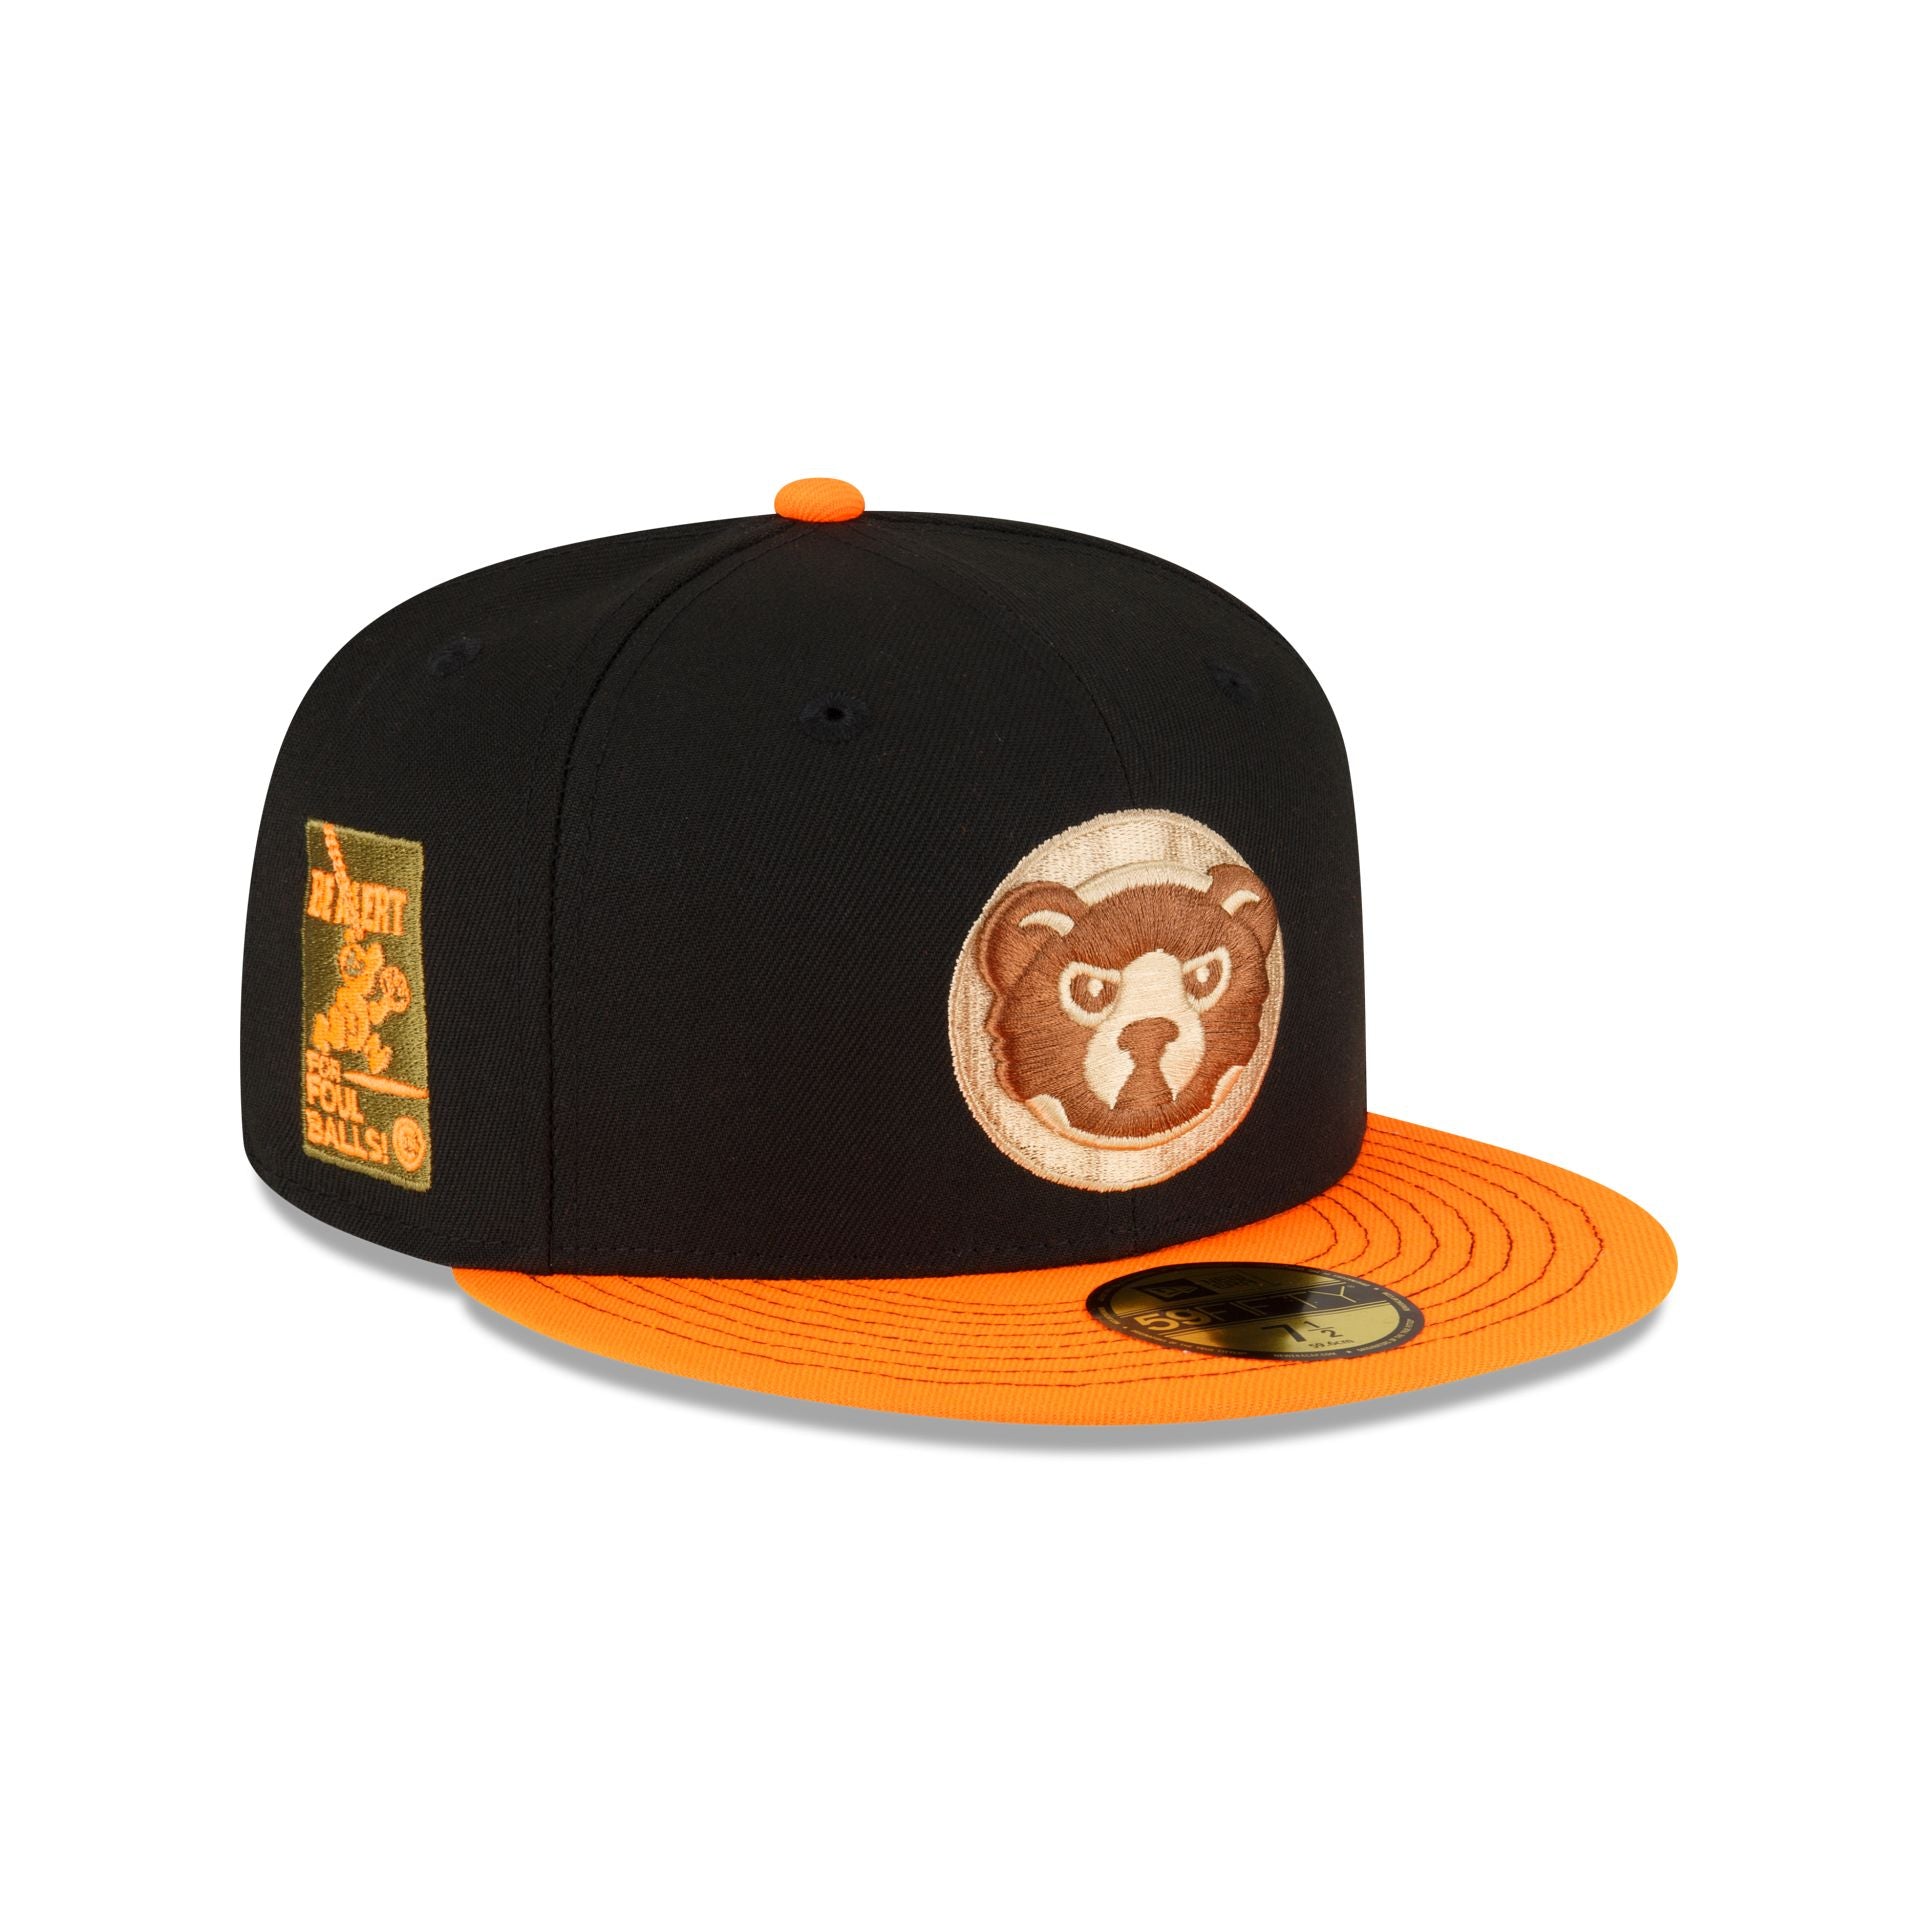 Fitted Hat Chicago 59FIFTY – Era Cubs Cap Orange New Caps Just Visor